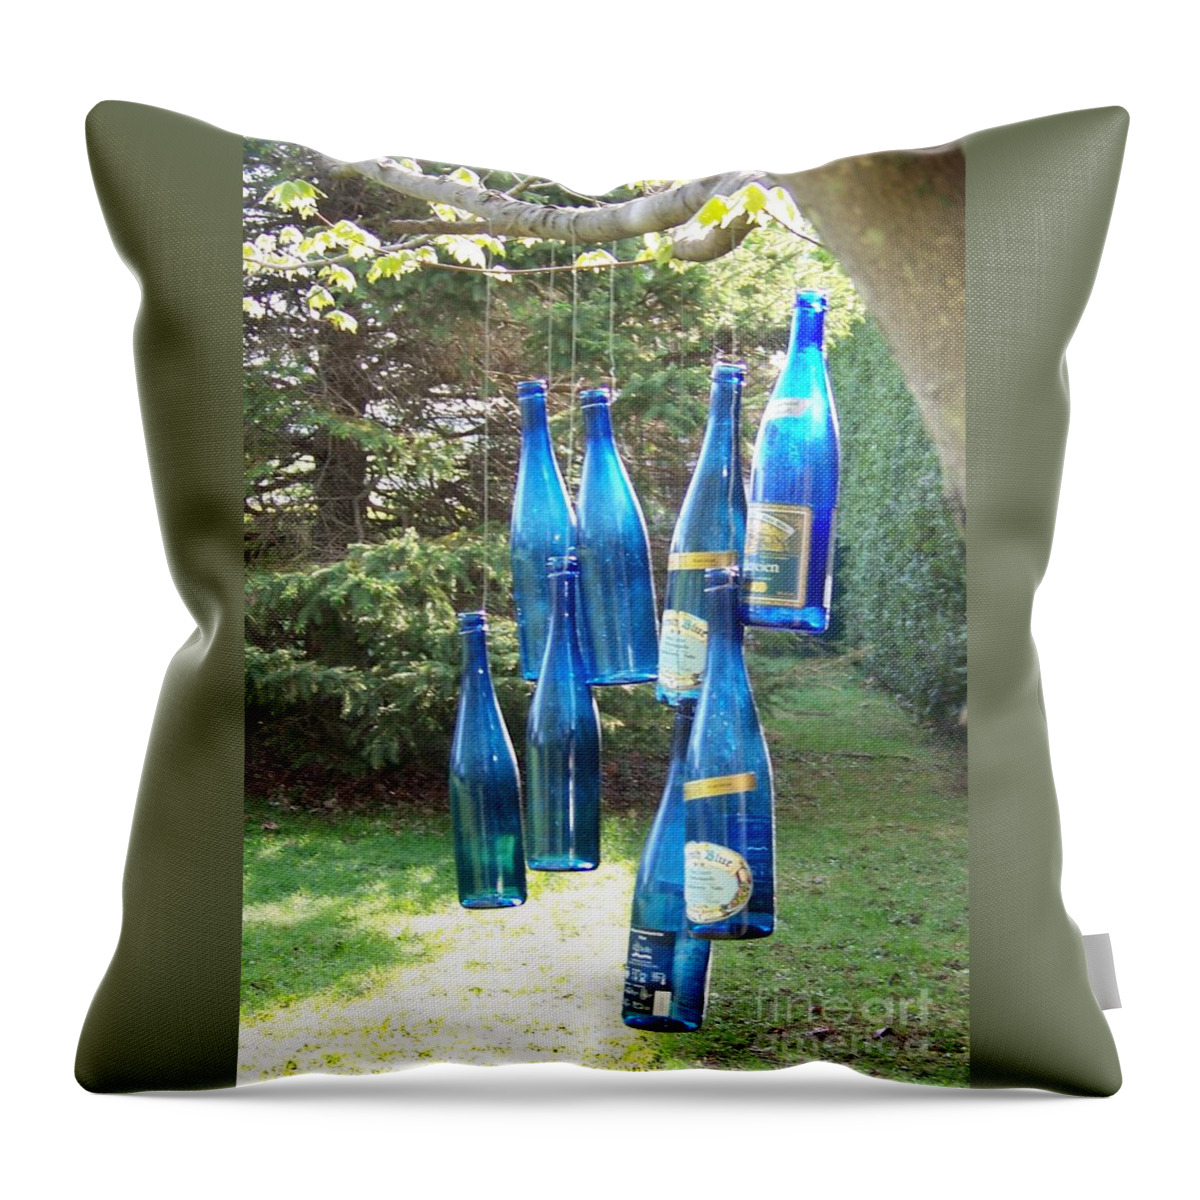 Trees Throw Pillow featuring the photograph Blue Bottle Tree by Jackie Mueller-Jones